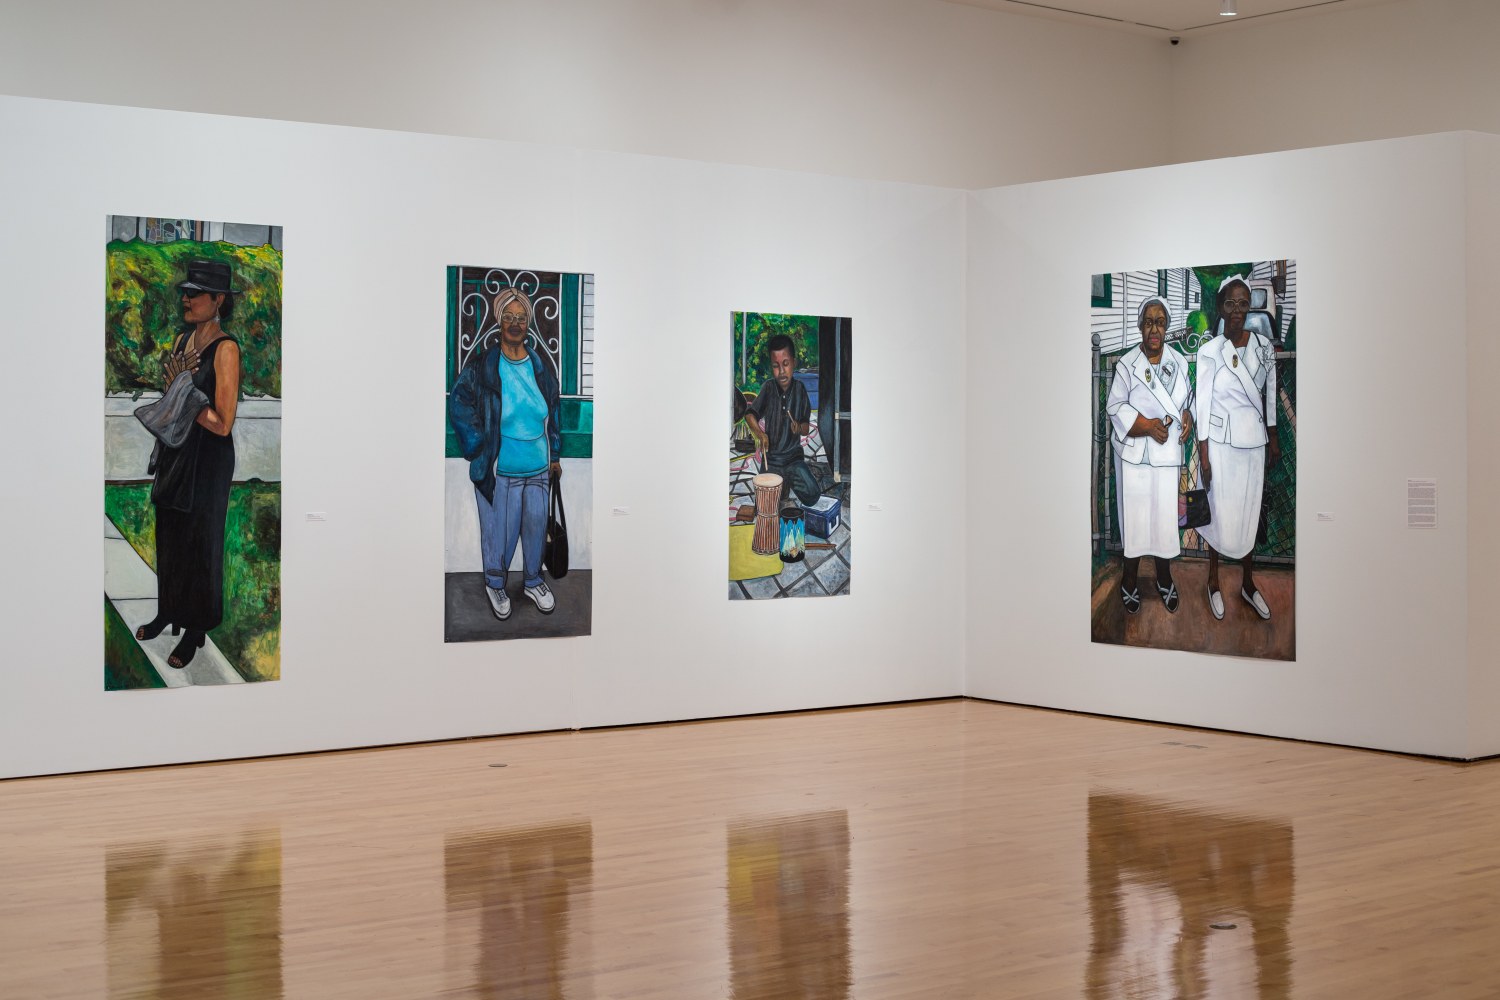 Photo Courtesy: Hilliard University Art Museum&amp;nbsp;

Installation View&amp;nbsp;

Hilliard University Art Museum, University of Louisiana at Lafayette&amp;nbsp;
&amp;ldquo;Face to Face: A Survey of Contemporary Portraiture by Louisiana Artists&amp;rdquo;&amp;nbsp;
curated by Jane Hart&amp;nbsp;
Nov 9, 2016 &amp;ndash; Jan 7, 2017&amp;nbsp;

Willie Birch, &amp;ldquo;Witnessing New Orleans&amp;rdquo; series